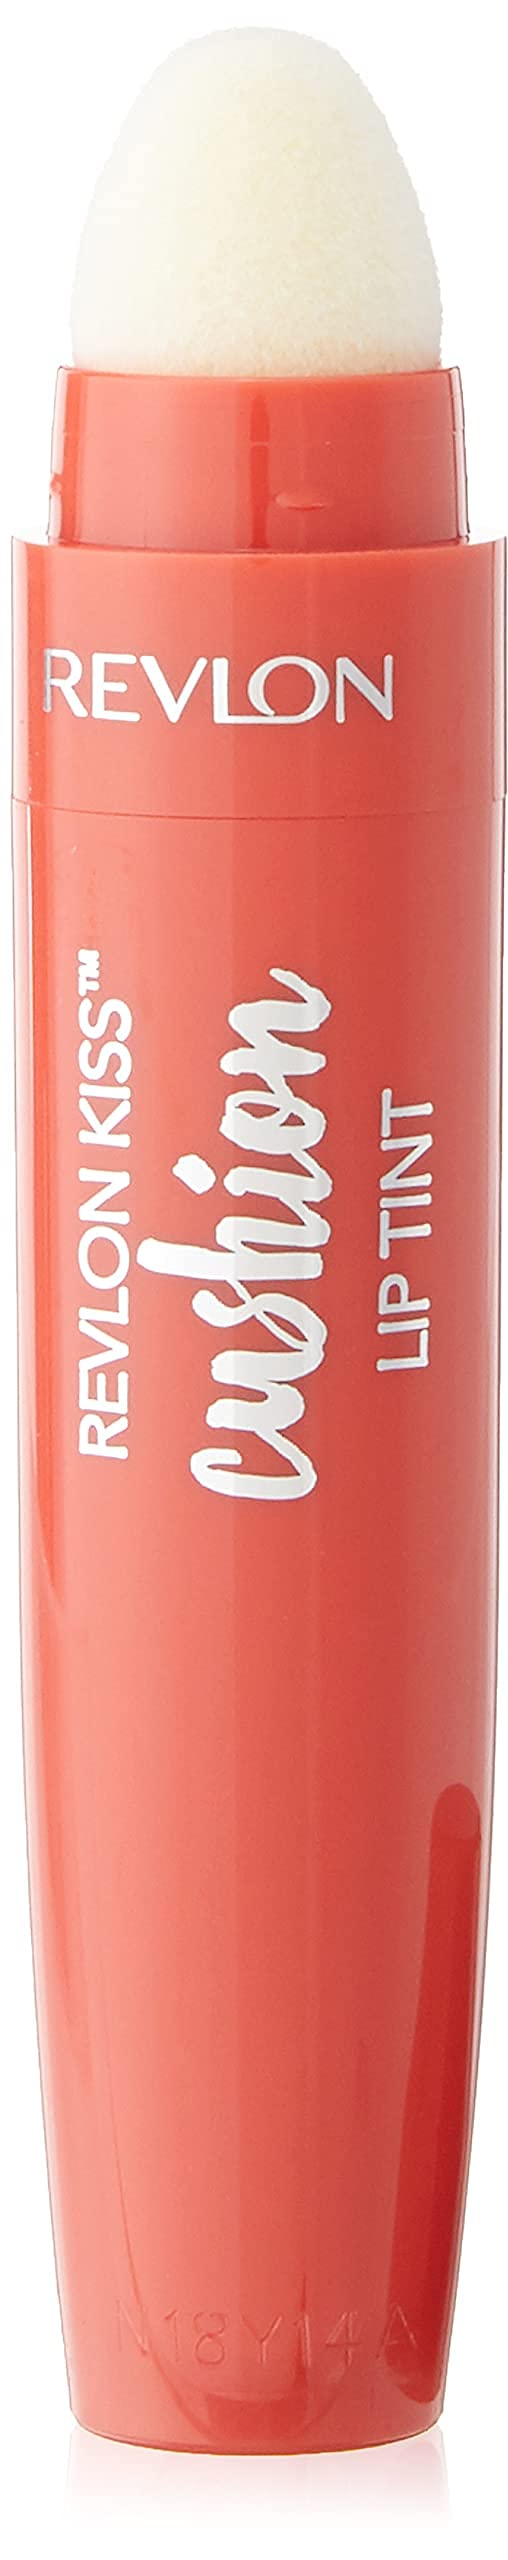 Revlon Kiss Cushion Lip Tint Lipstick (High End Coral) $1.95 w/ S&S + Free Shipping w/ Prime or on $25+